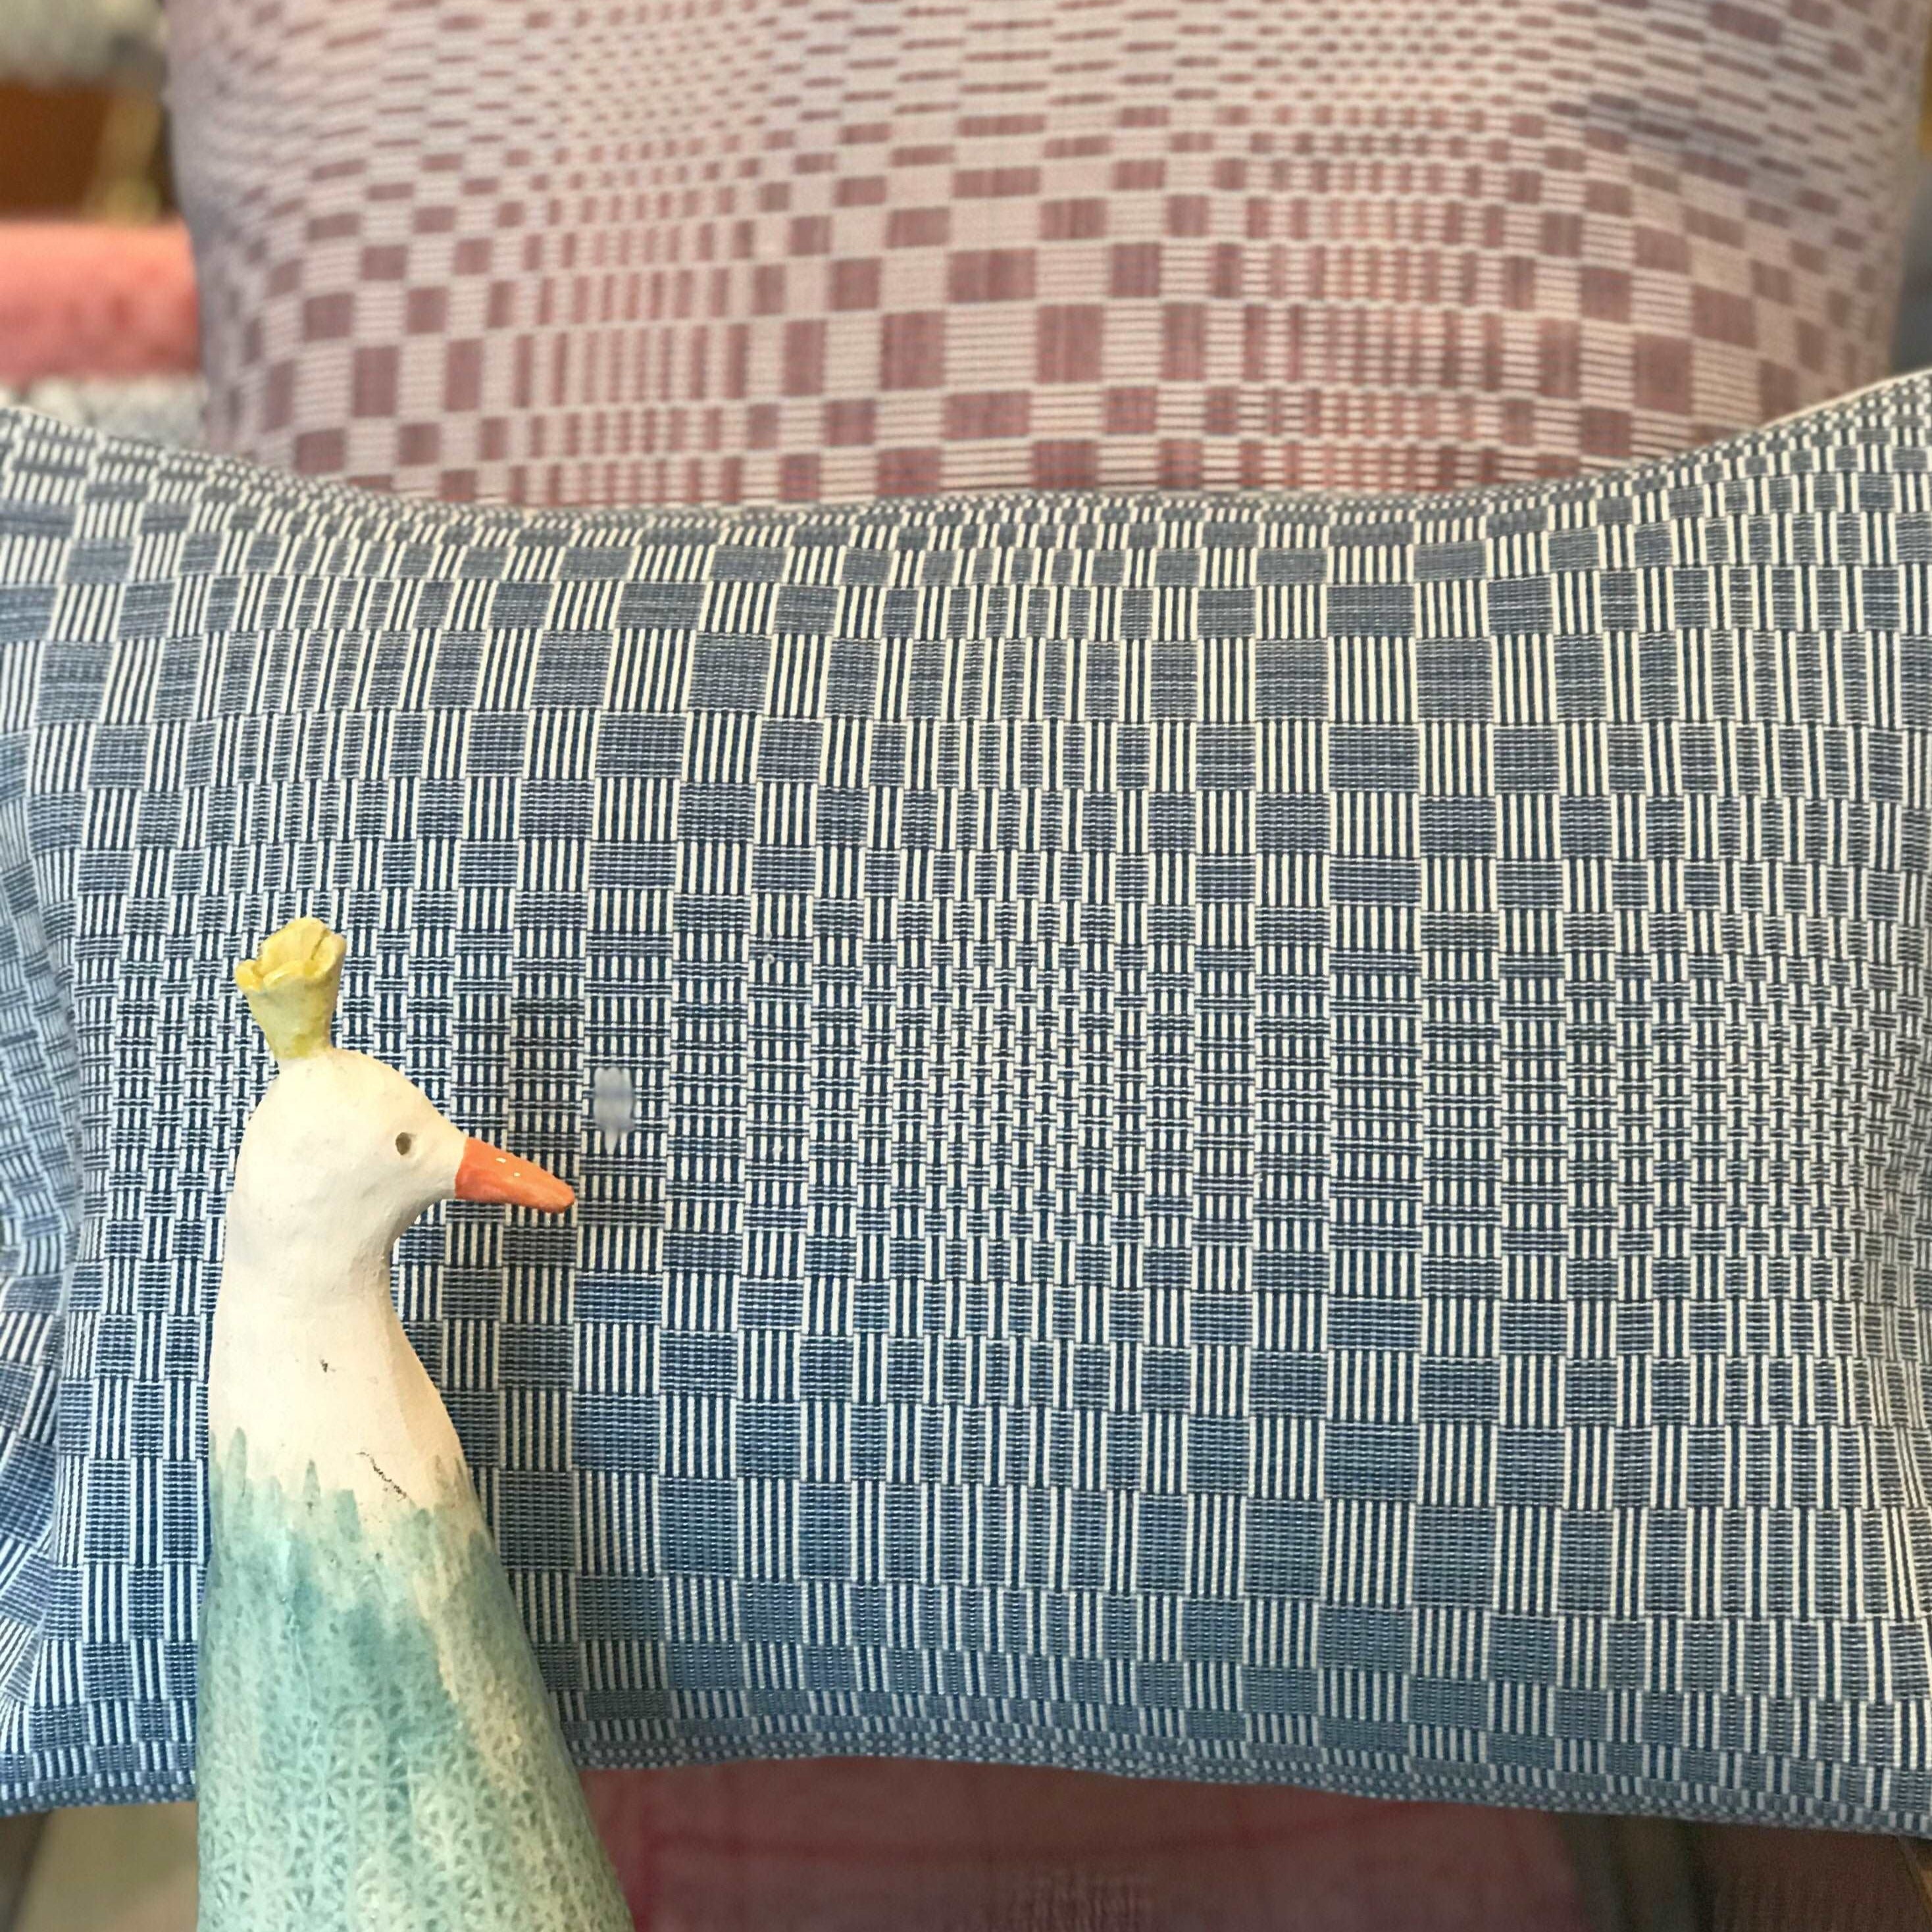 Hand loomed cushion cover using rare Binakol weave from the Philippines. Backed with linen. Made in Paris, France.